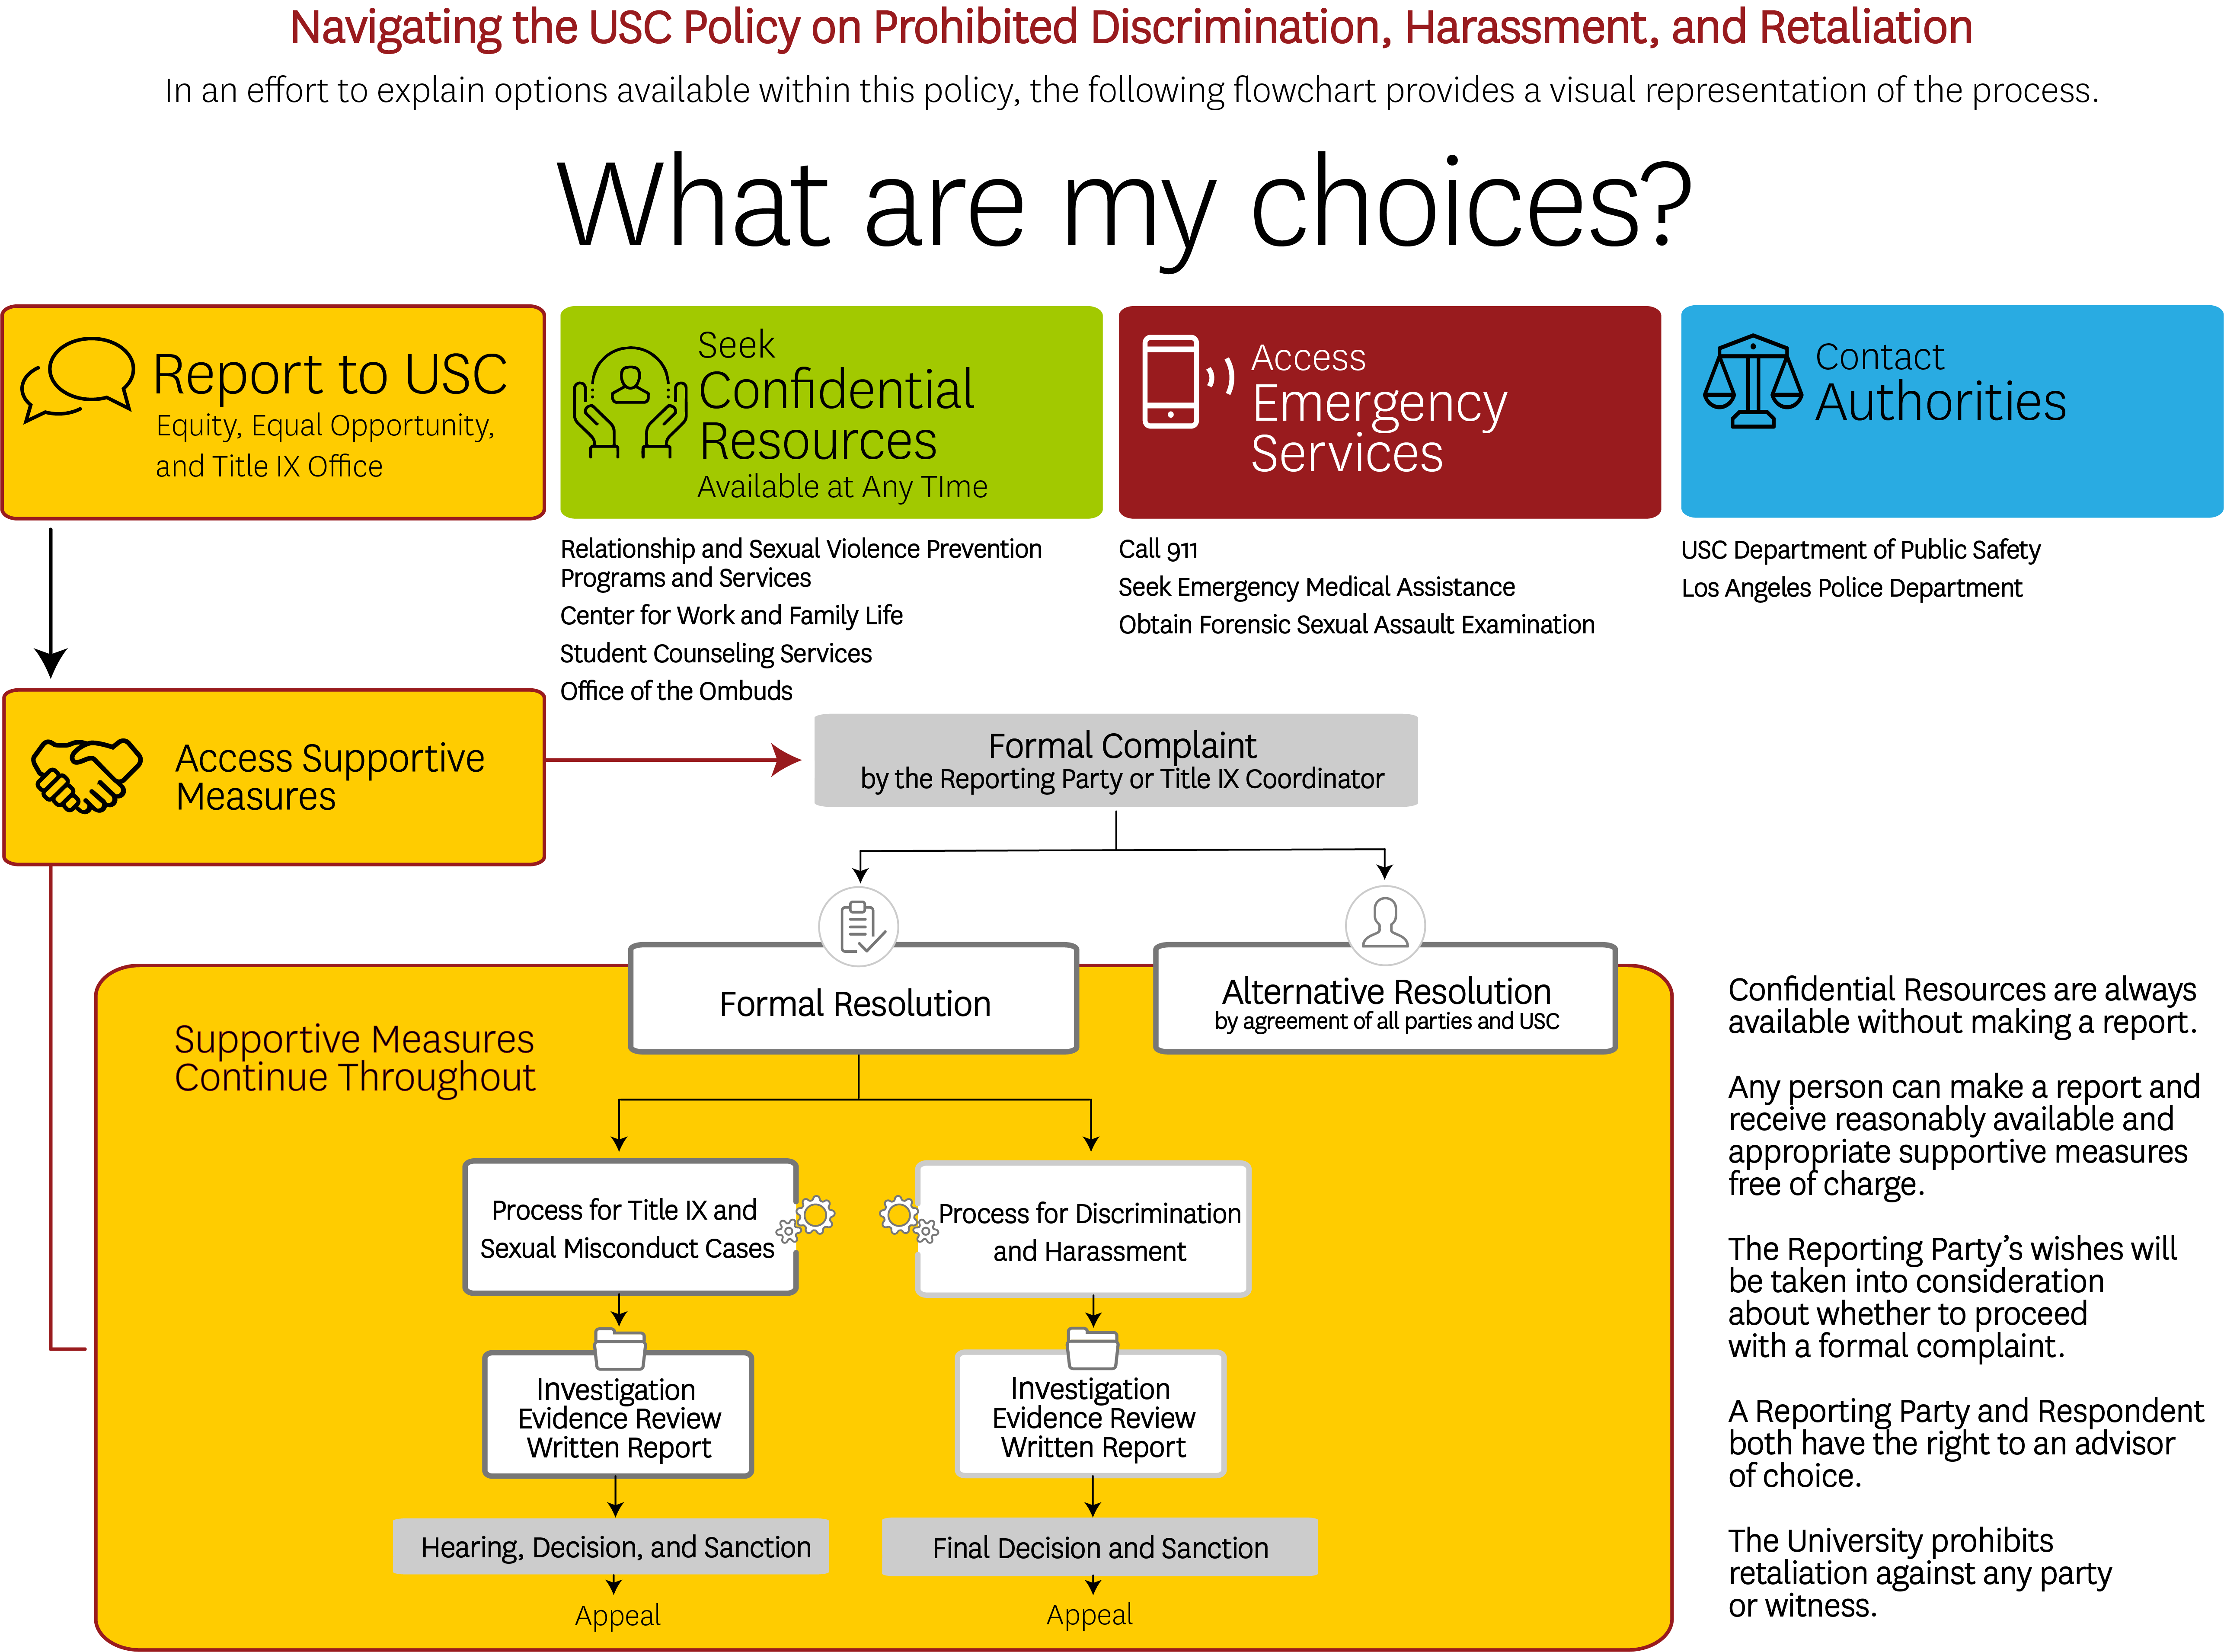 Flowchart illustrating the reporting options available within the USC Policy on Prohibited Discrimination, Harassment, and Retaliation